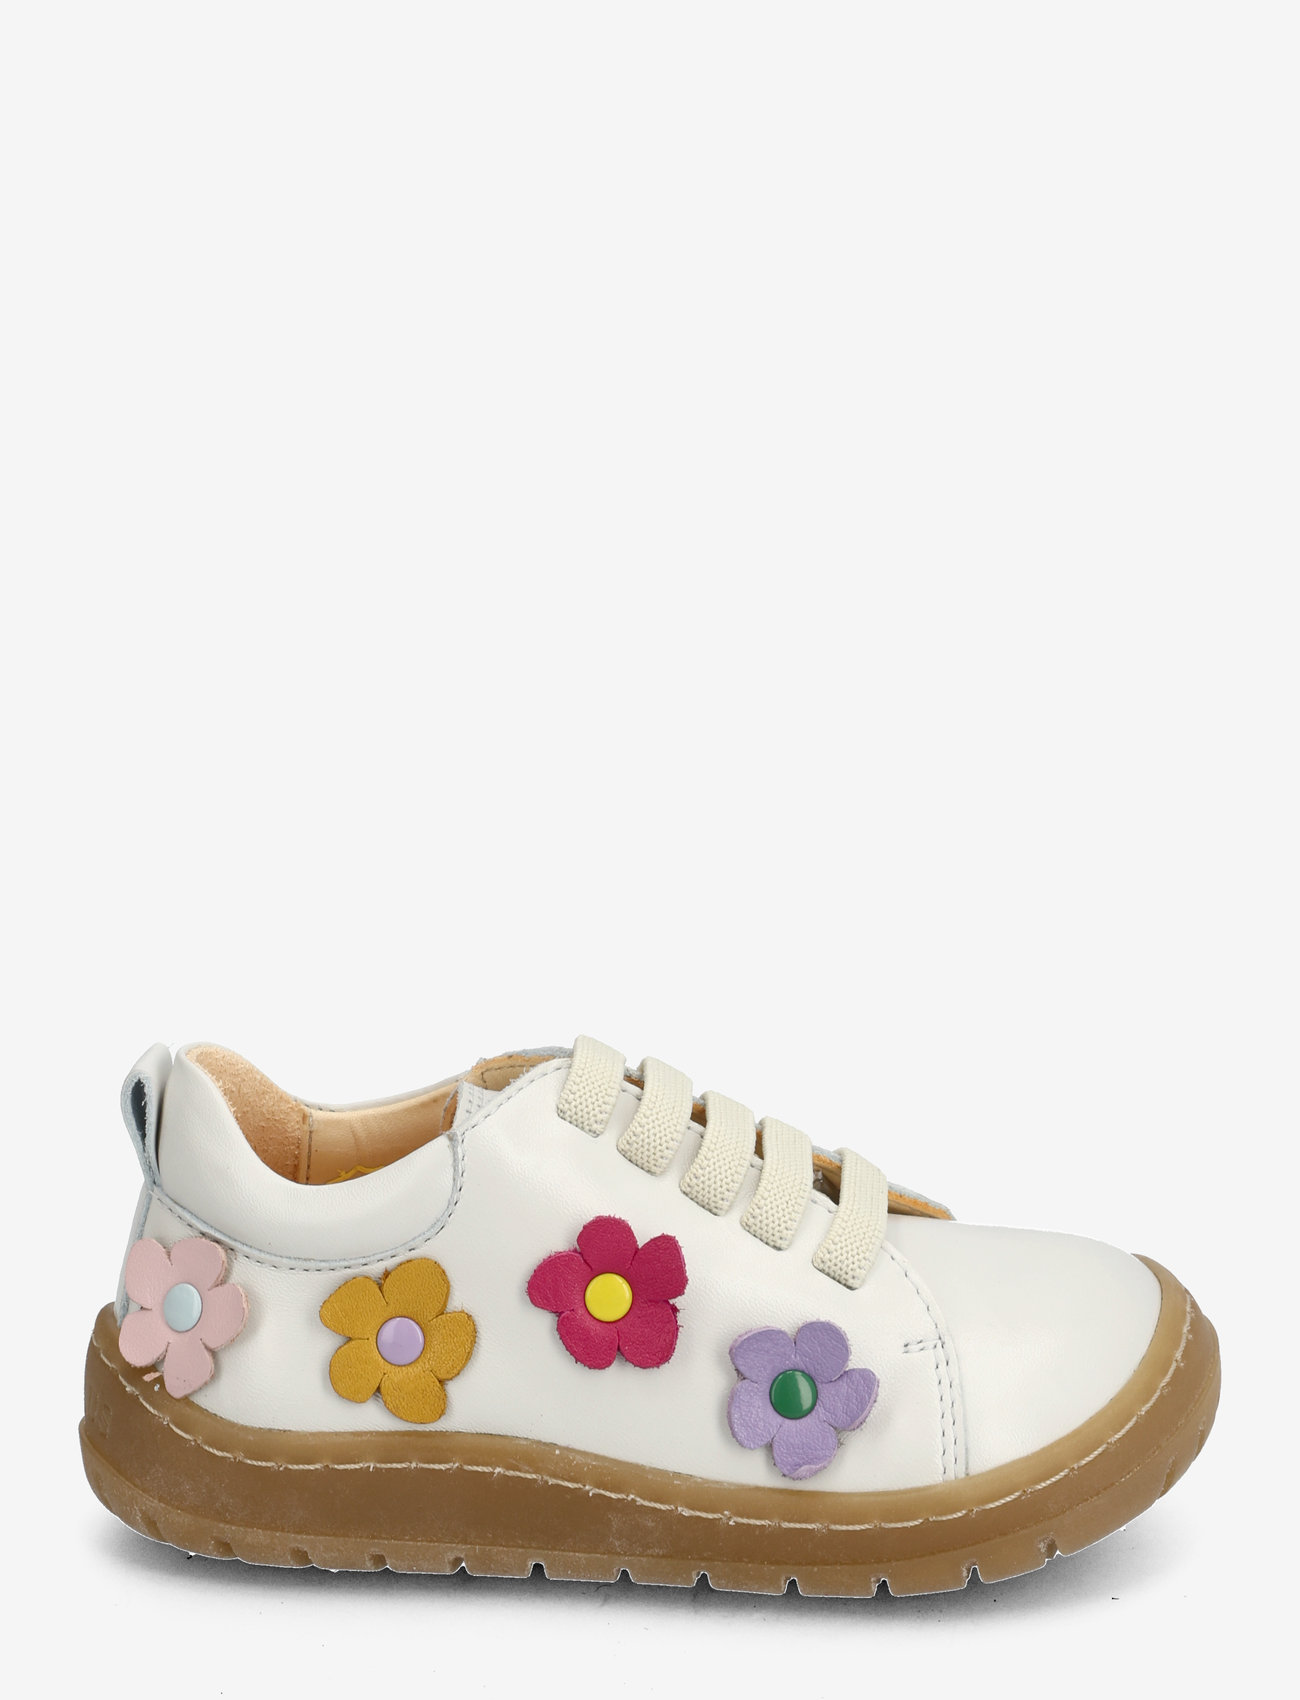 ANGULUS - Shoes - flat - with lace - summer savings - 1493/a002 off white/flowers - 1